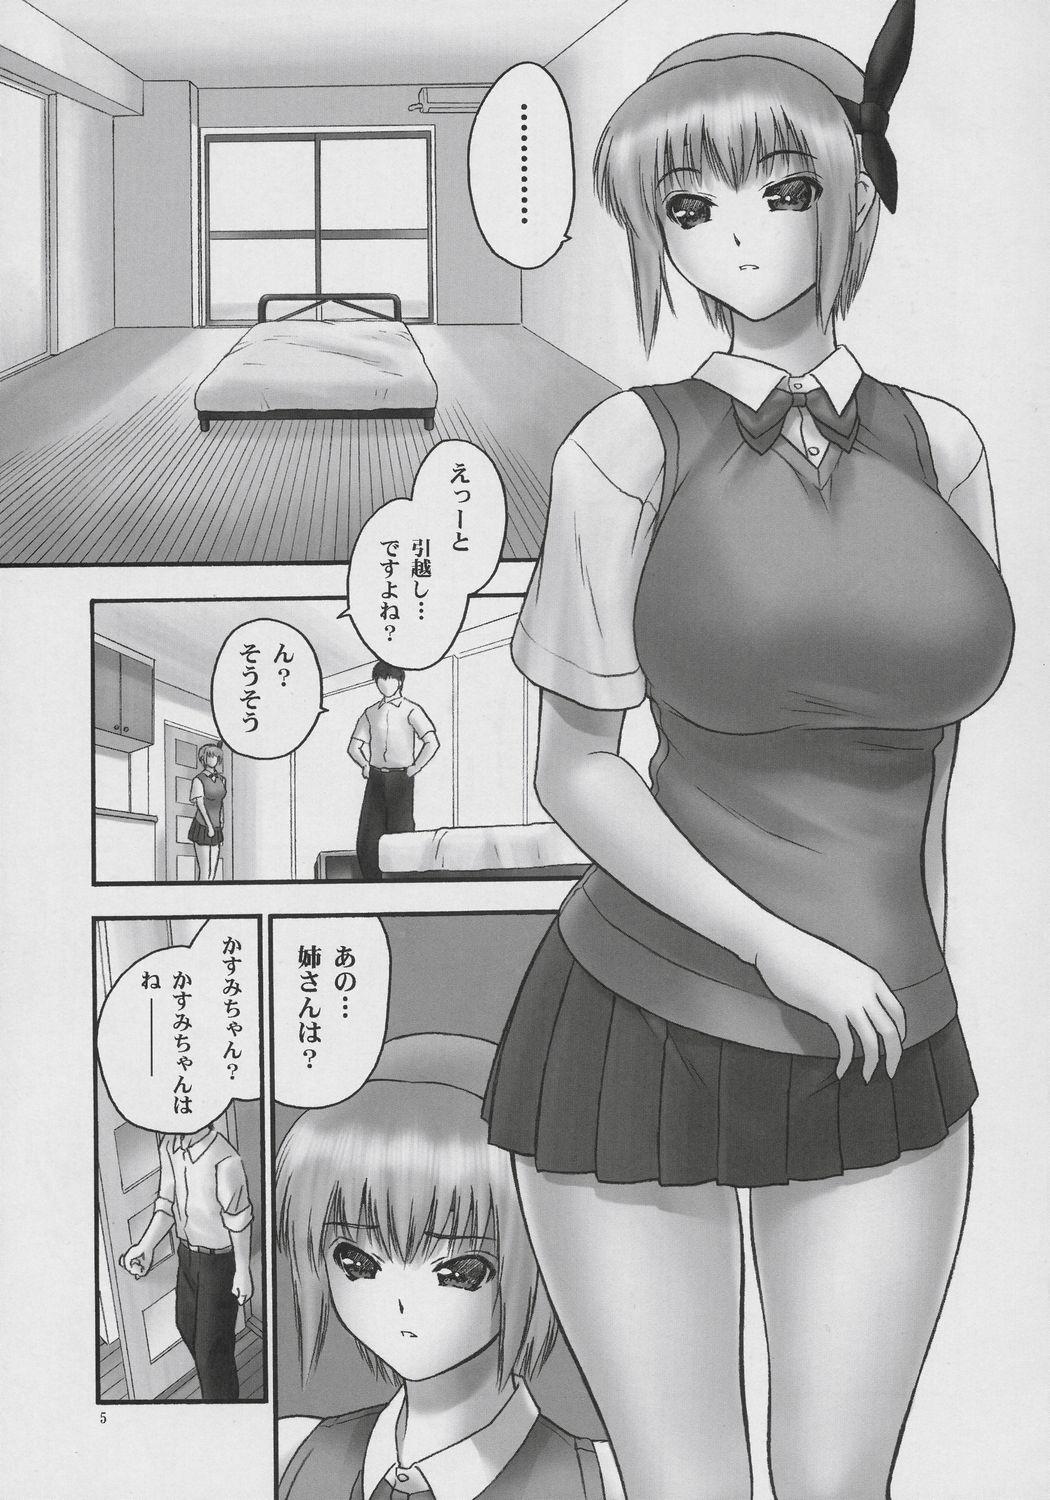 Home Rei Chapter 03: Involve Slave to the Grind - Dead or alive Solo Female - Page 4